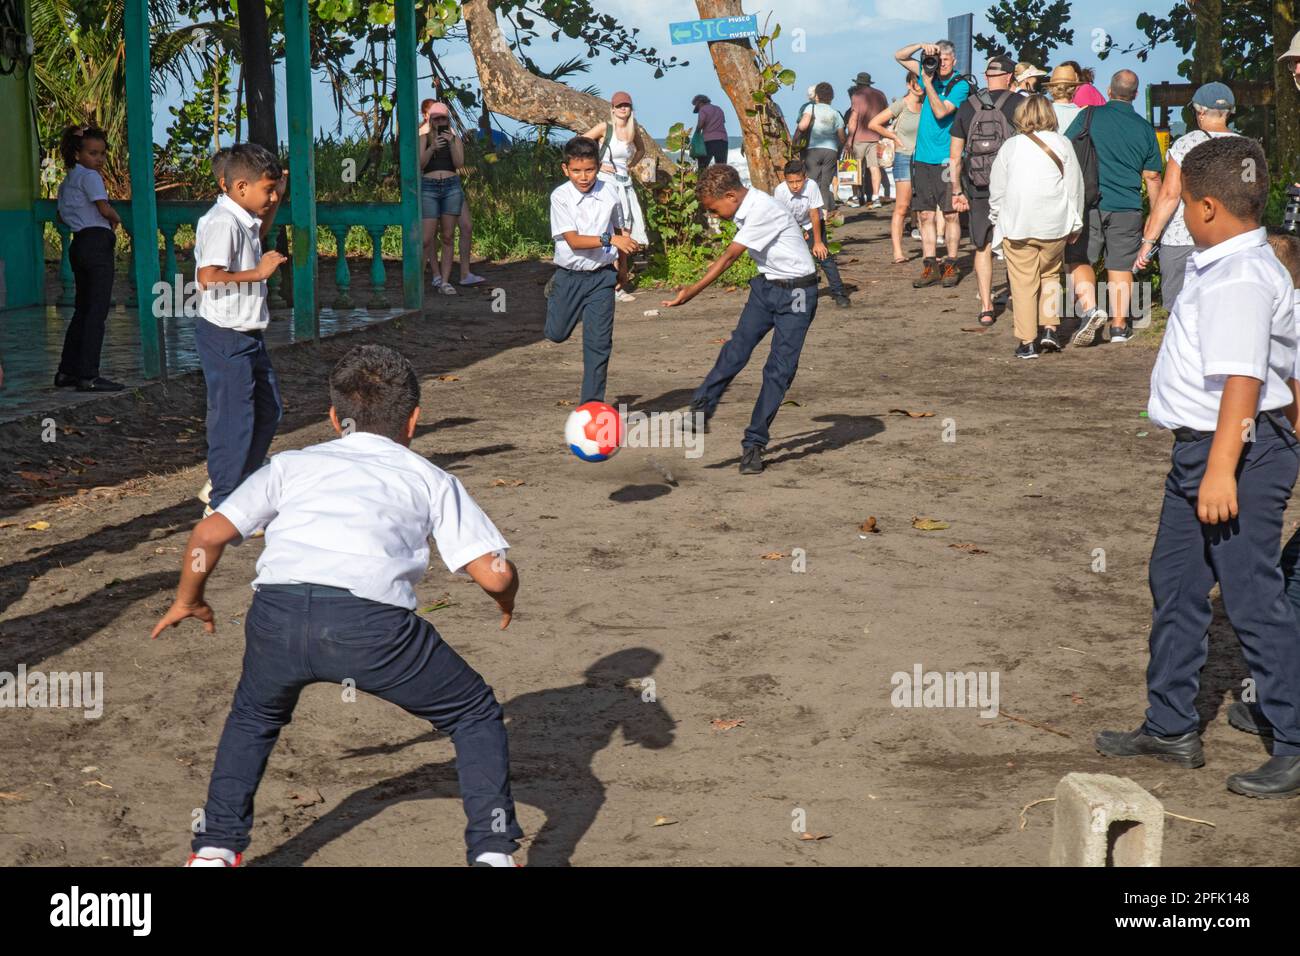 Tortuguero, Costa Rica - As tourists walk by, school boys play football (soccer) outside their school in this small village on the Caribbean coast. Co Stock Photo